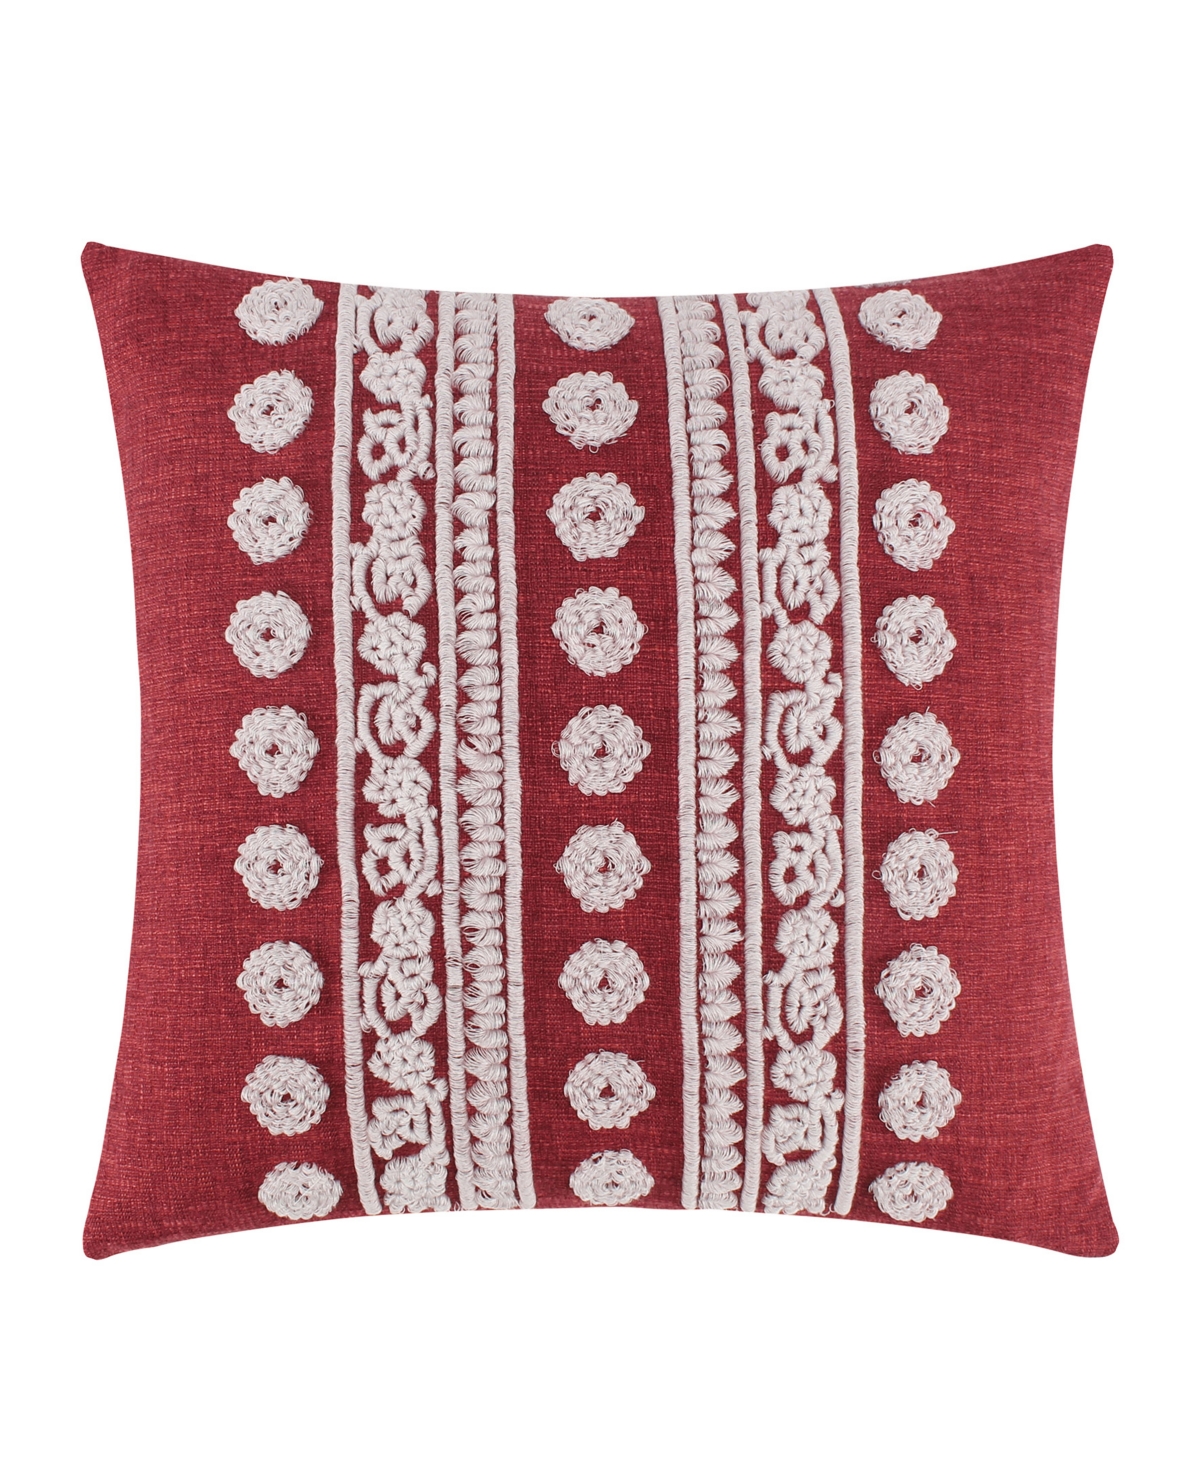 Levtex Khotan Embroidered Decorative Pillow, 18" X 18" In Red